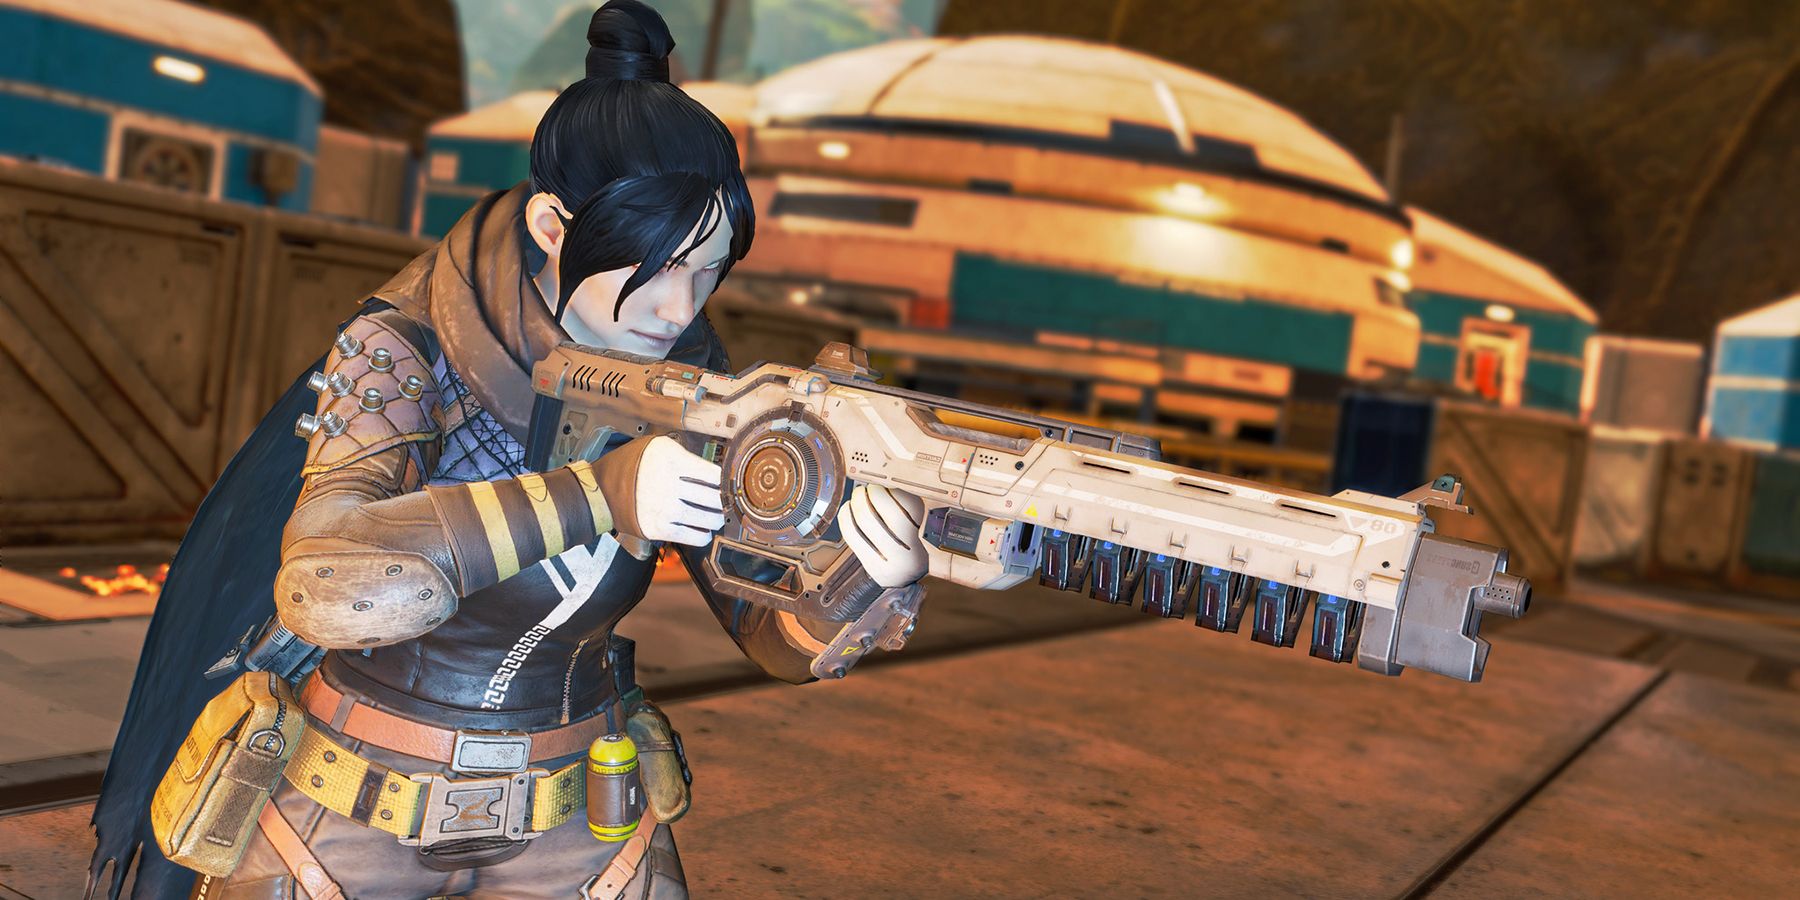 All new classes in Apex Legends  All legends and their classes